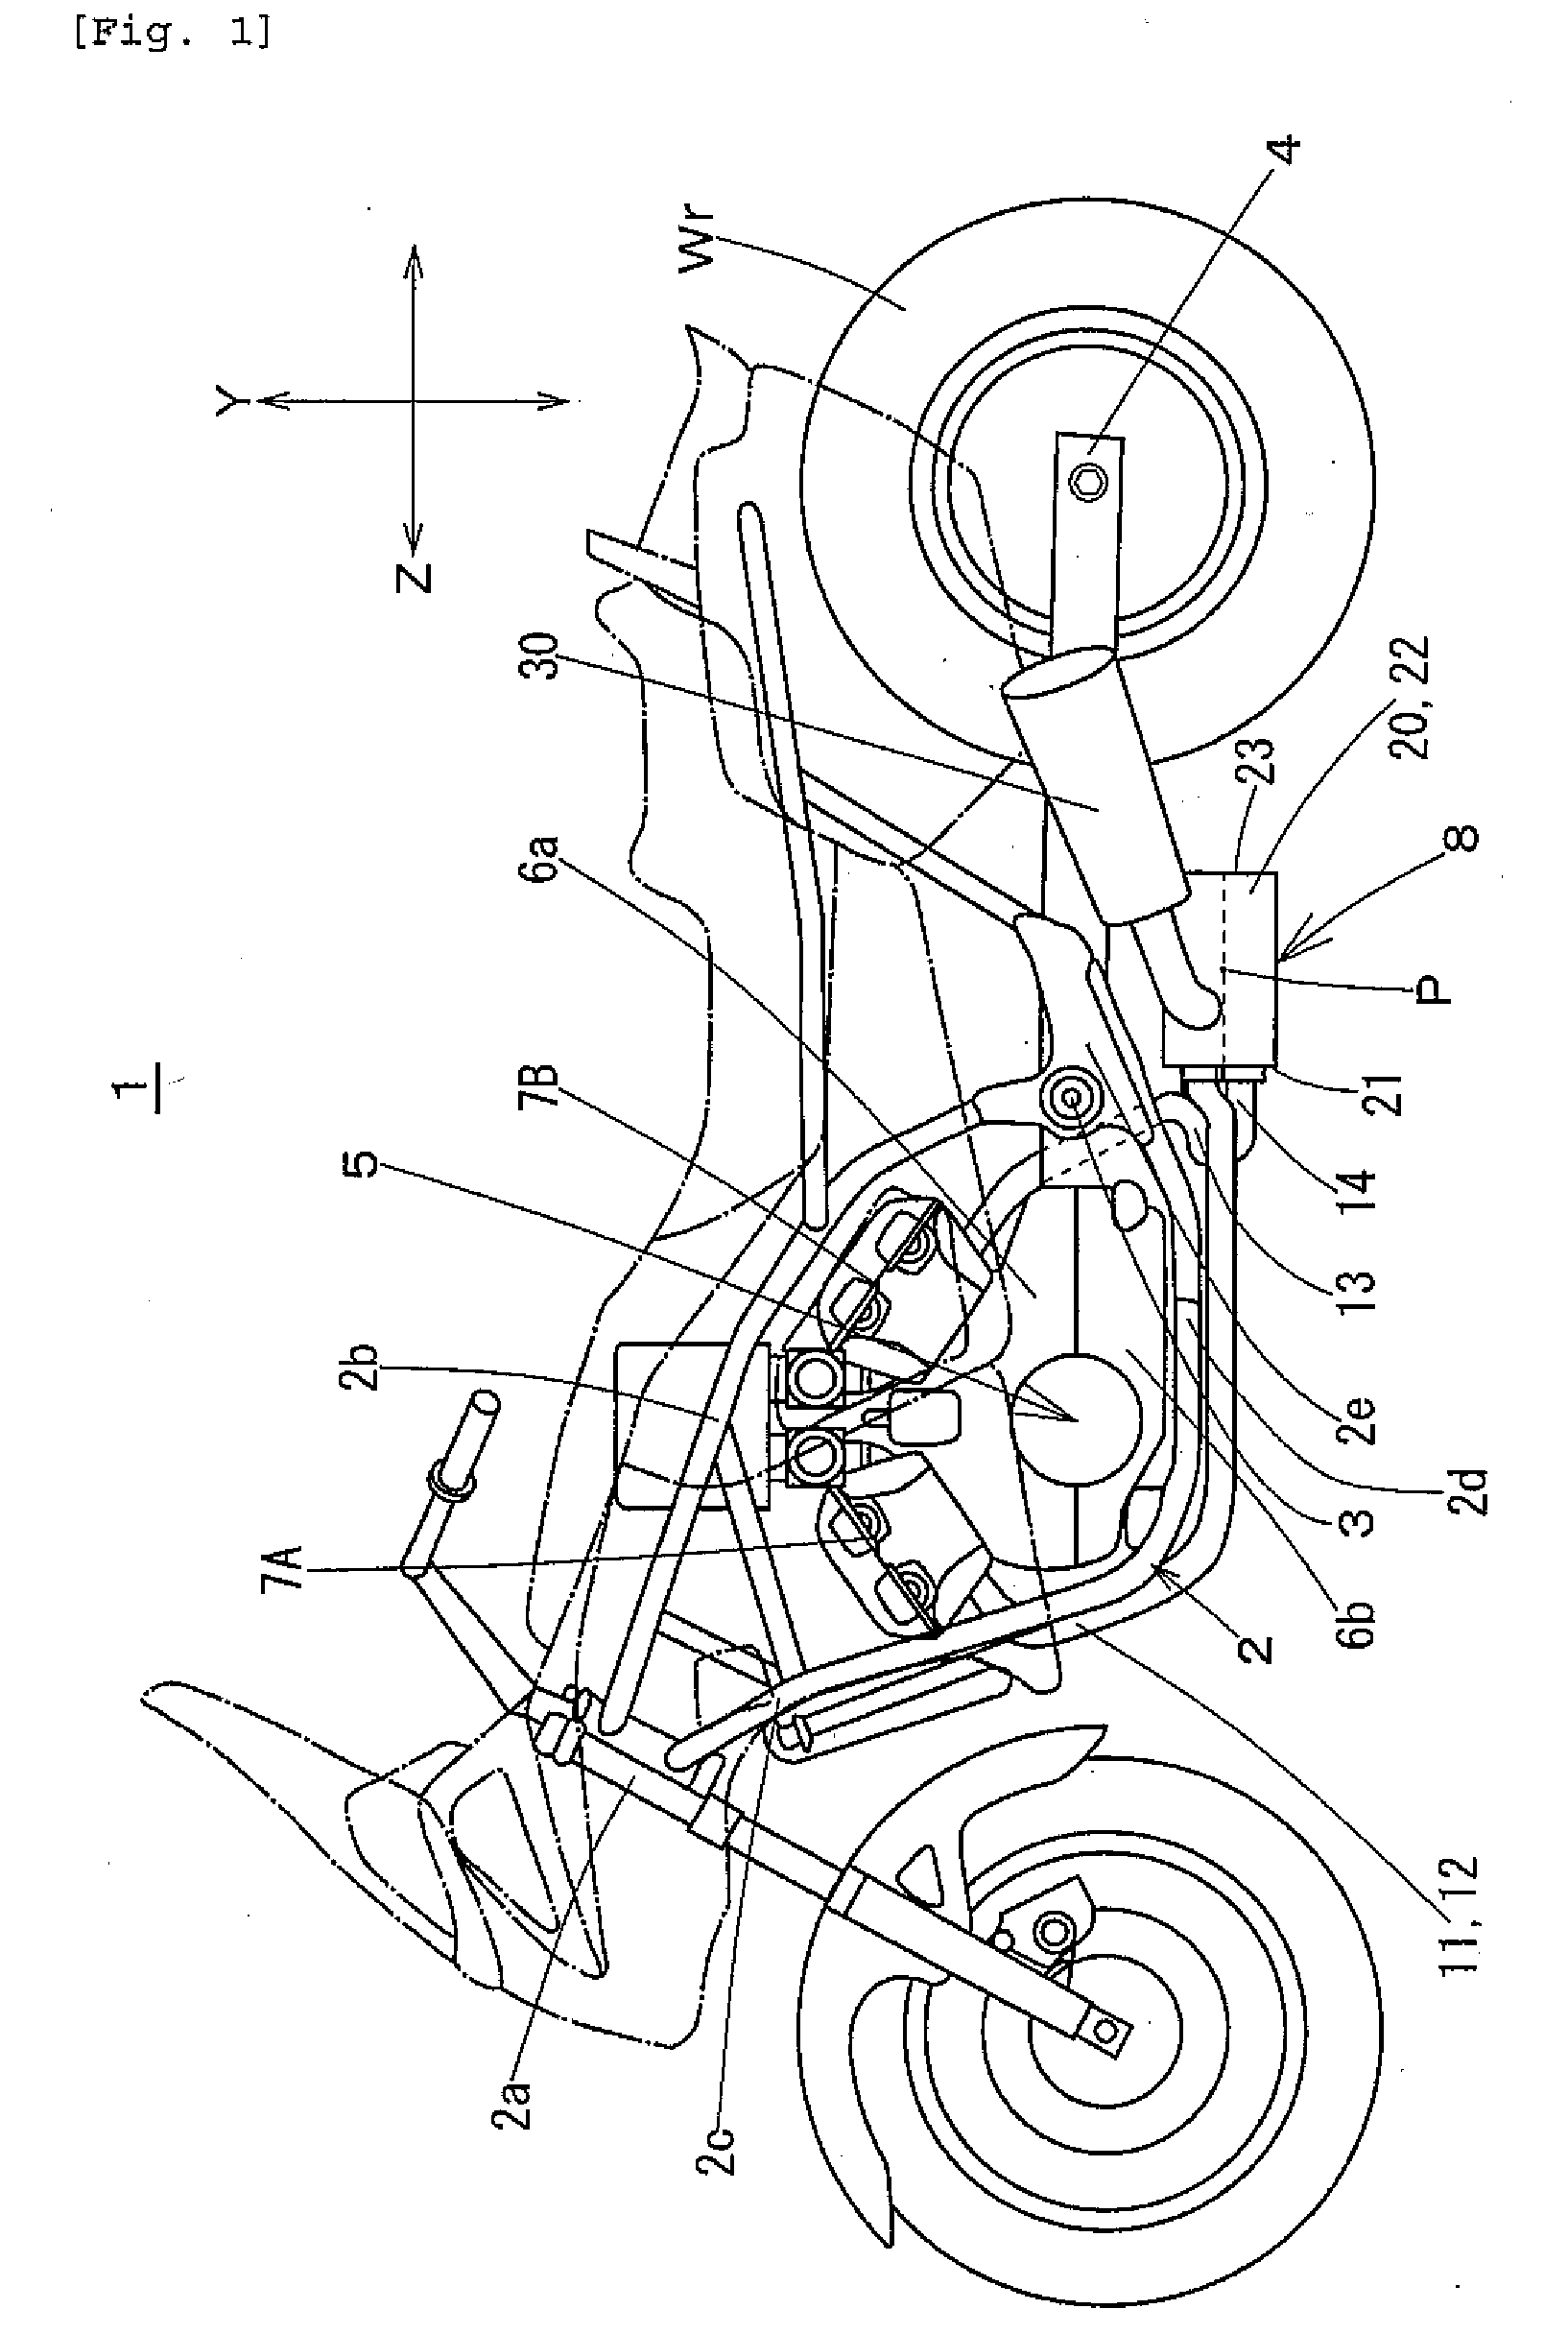 Exhaust System and Saddle-Ride Type Vehicle